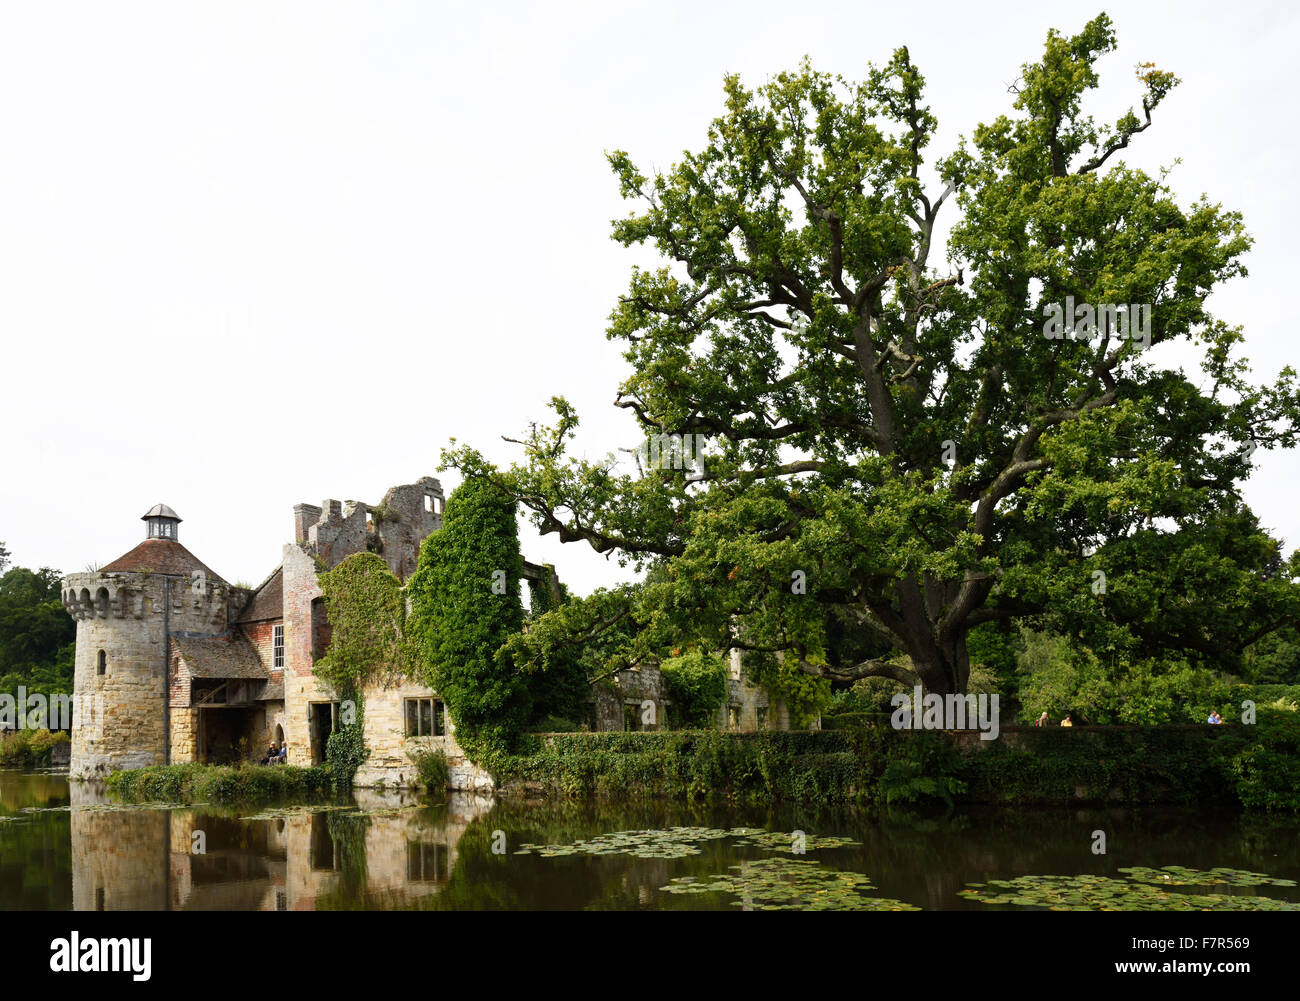 Scotney Castle, Kent. Scotney Castle is a country house, romantic garden and 14th century moated castle - all set in a beautiful wooded estate. Stock Photo